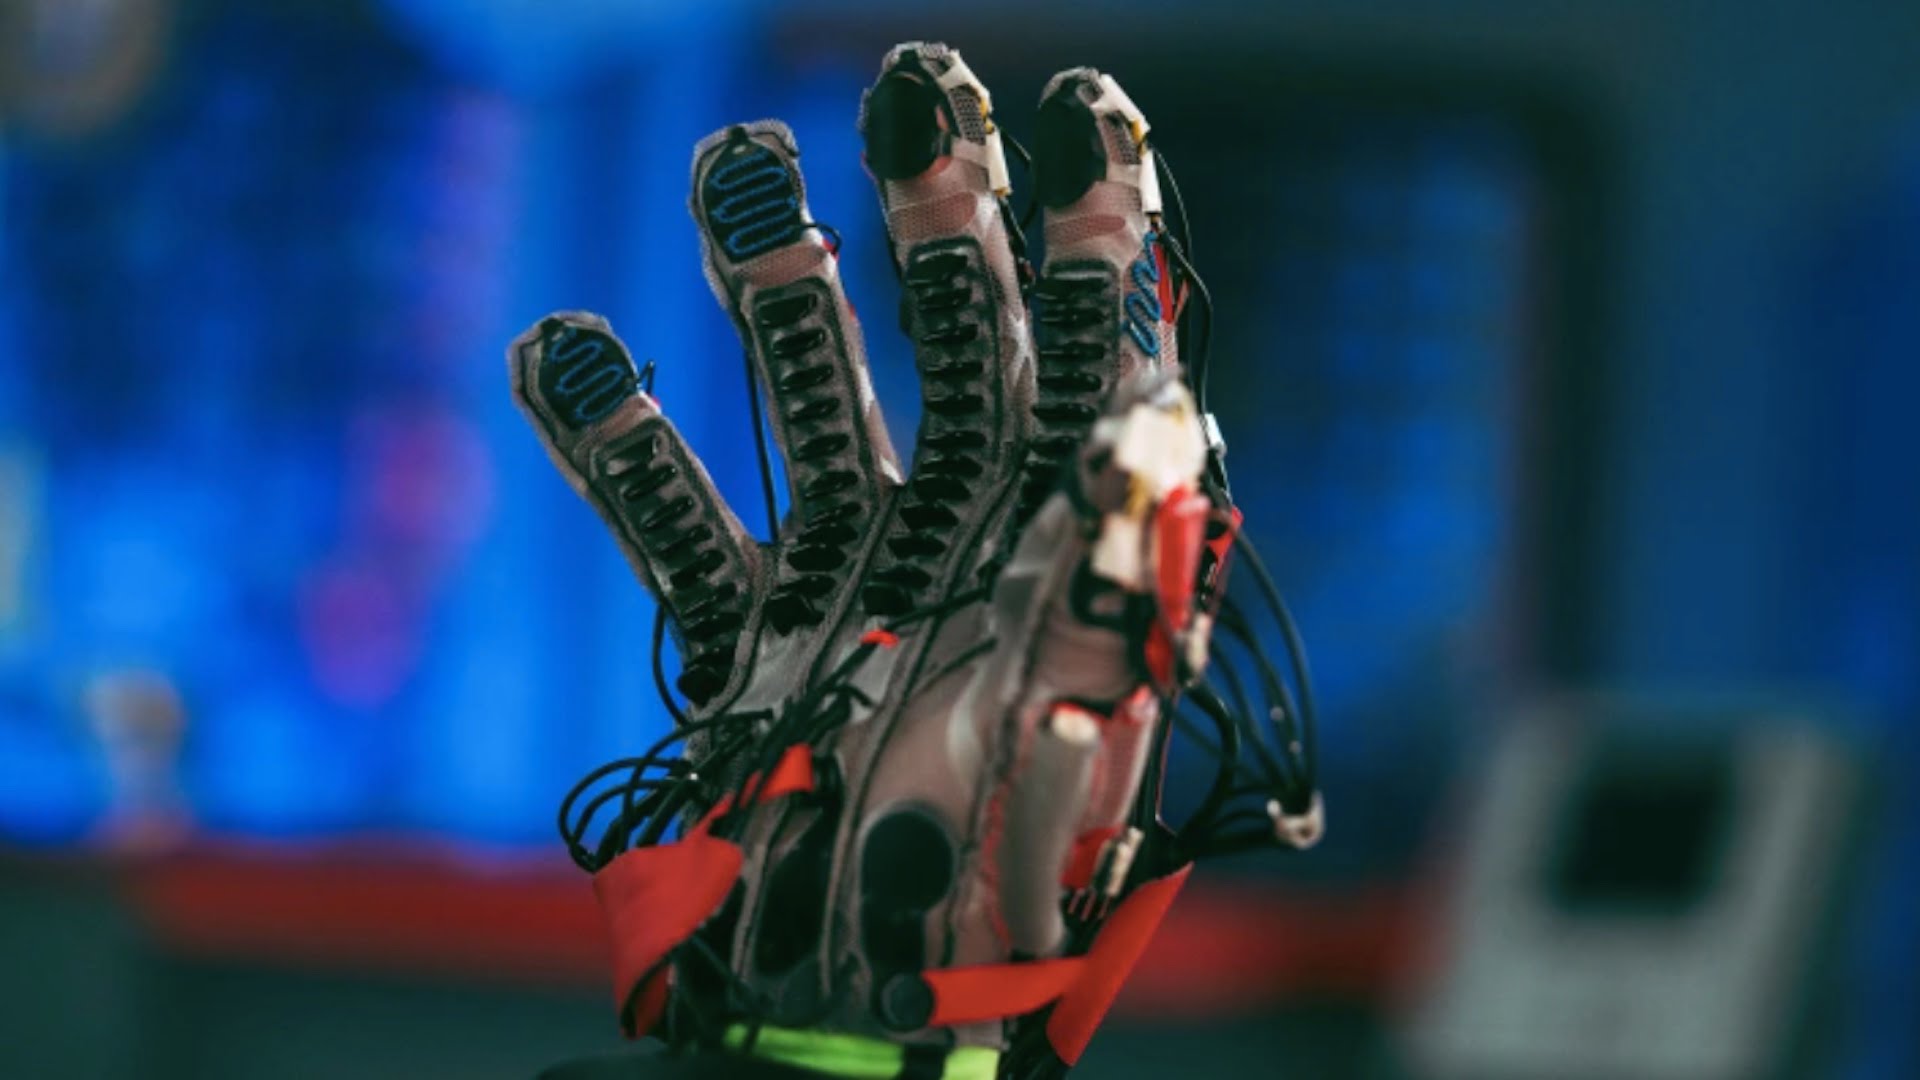 OpenXR aims to standardize "advanced haptics" for VR and AR